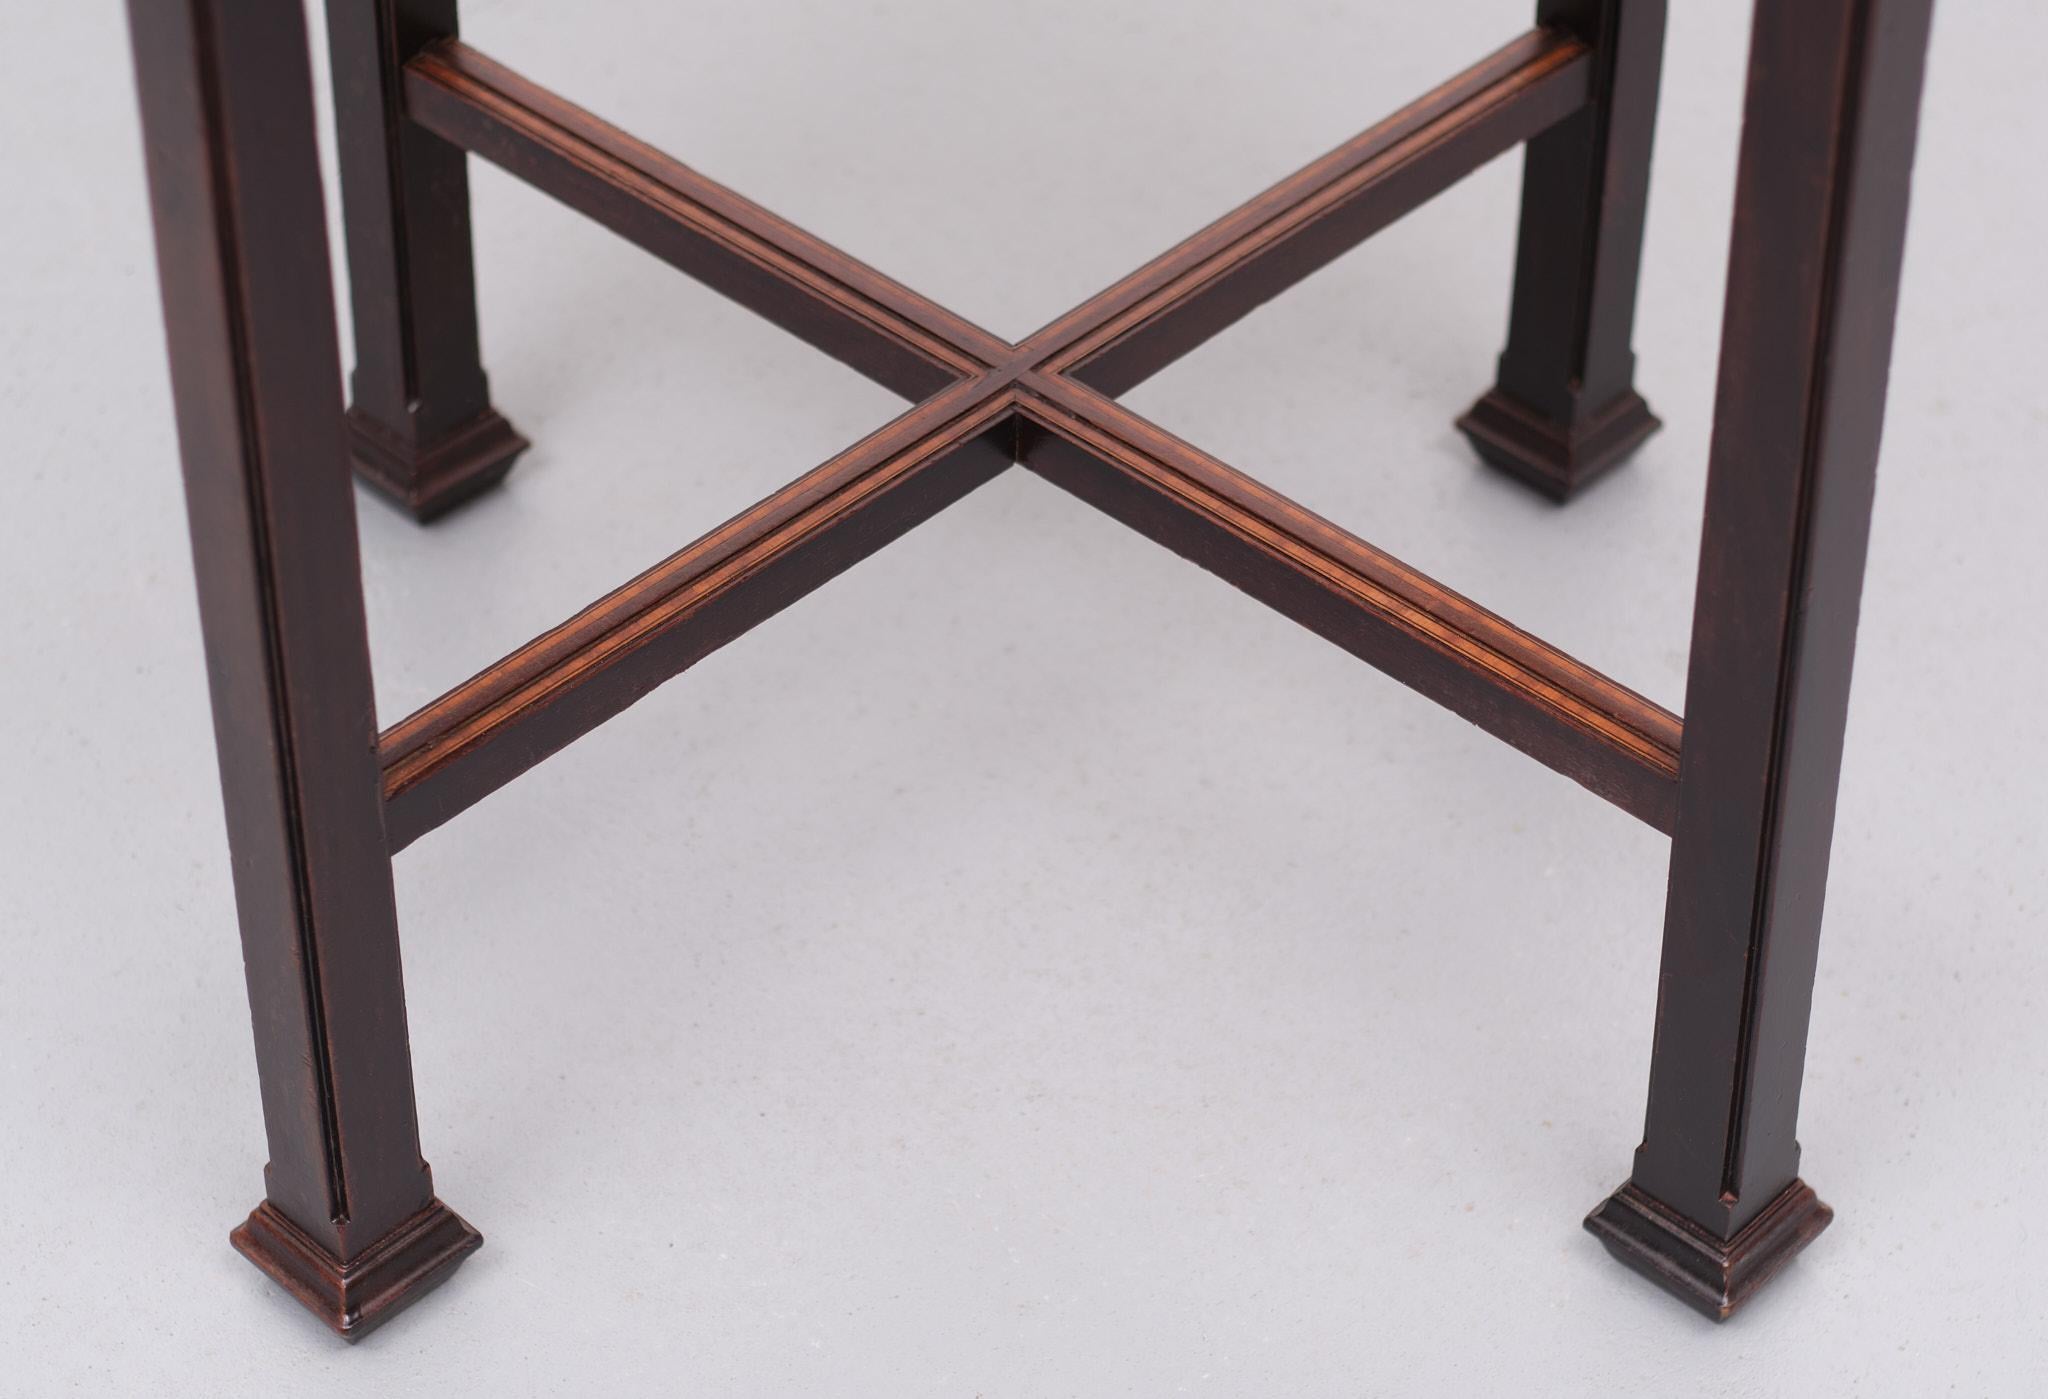 Dutch Art Deco Octagonal Mahogany Side Table 1925 In Good Condition For Sale In Den Haag, NL